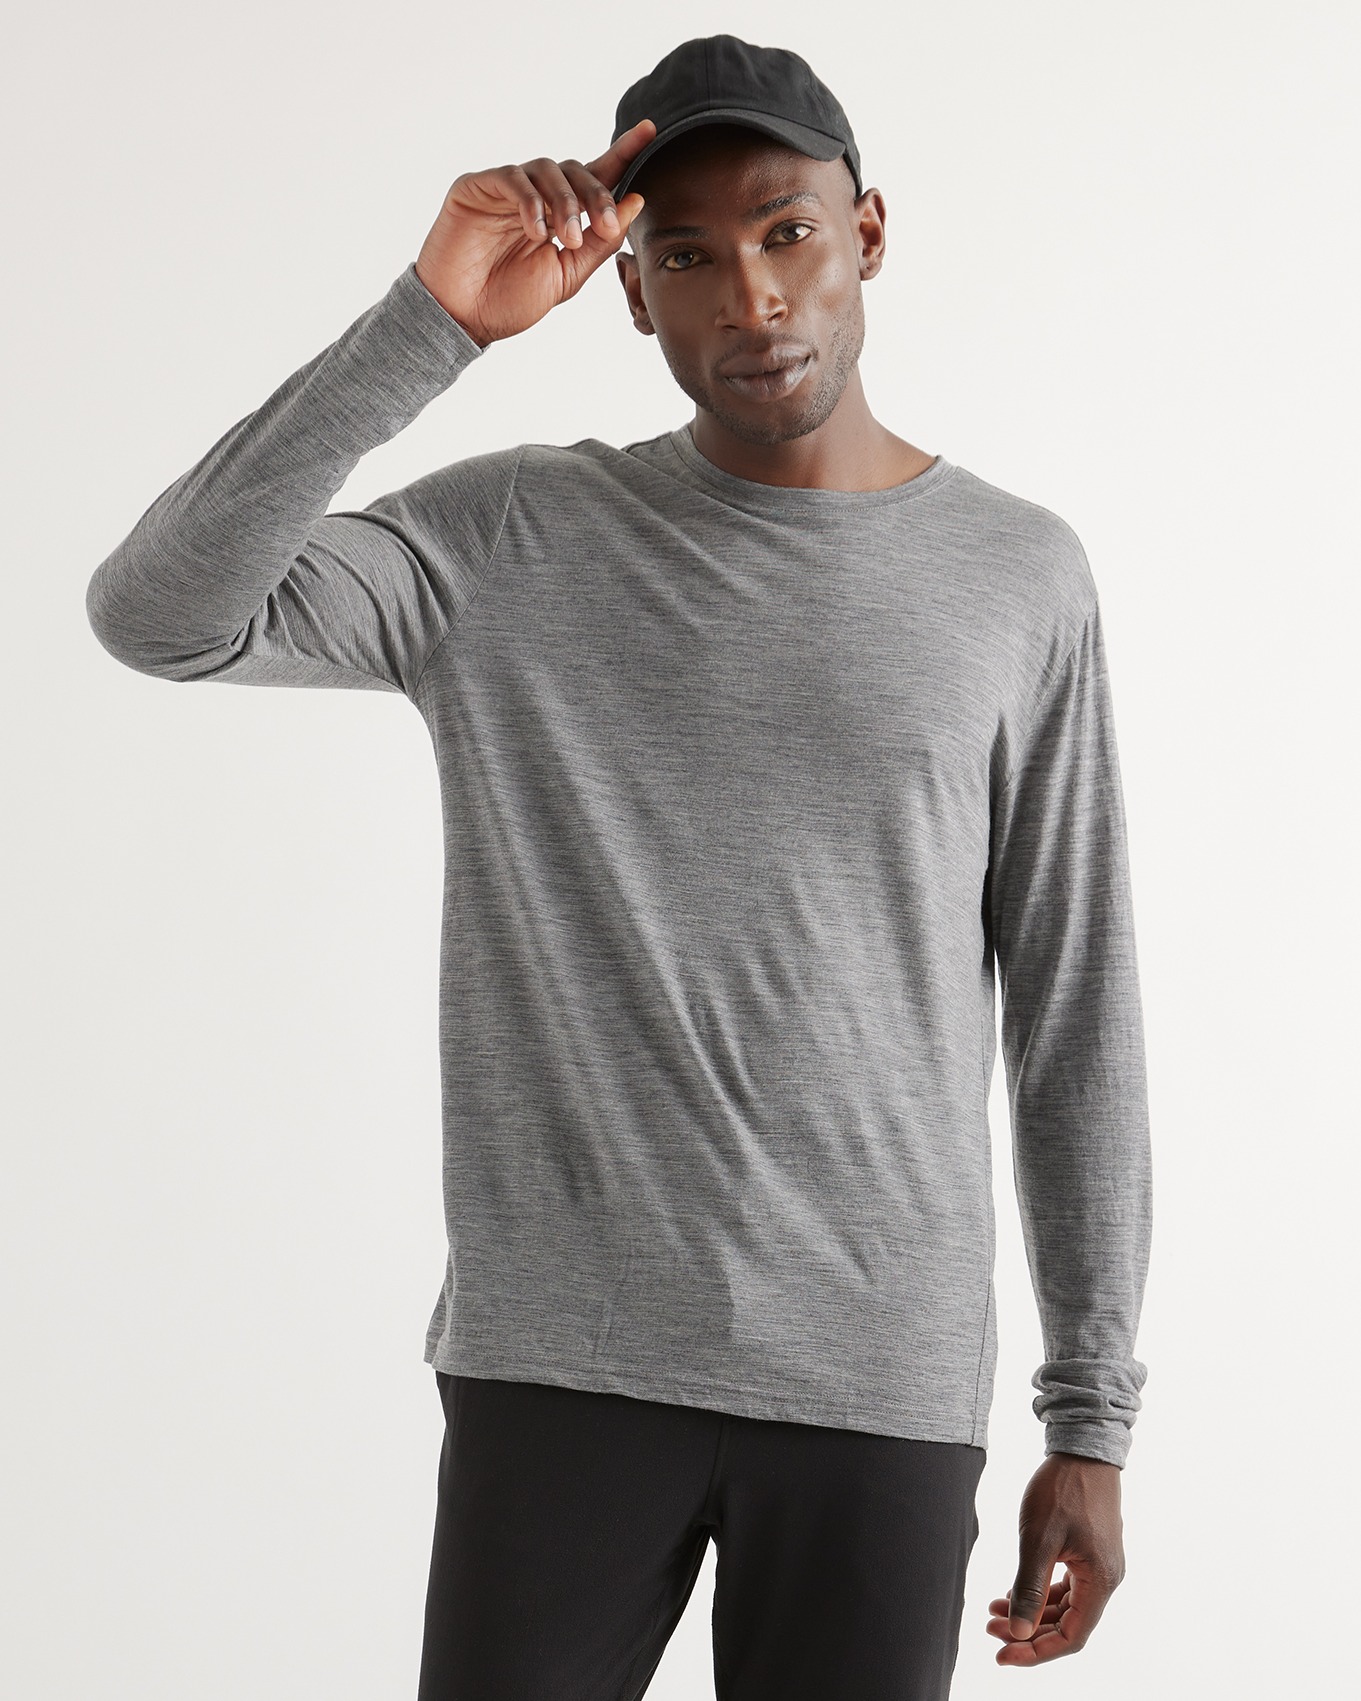 Quince Men's Merino Long Sleeve Base Layer T-shirt In Heather Grey